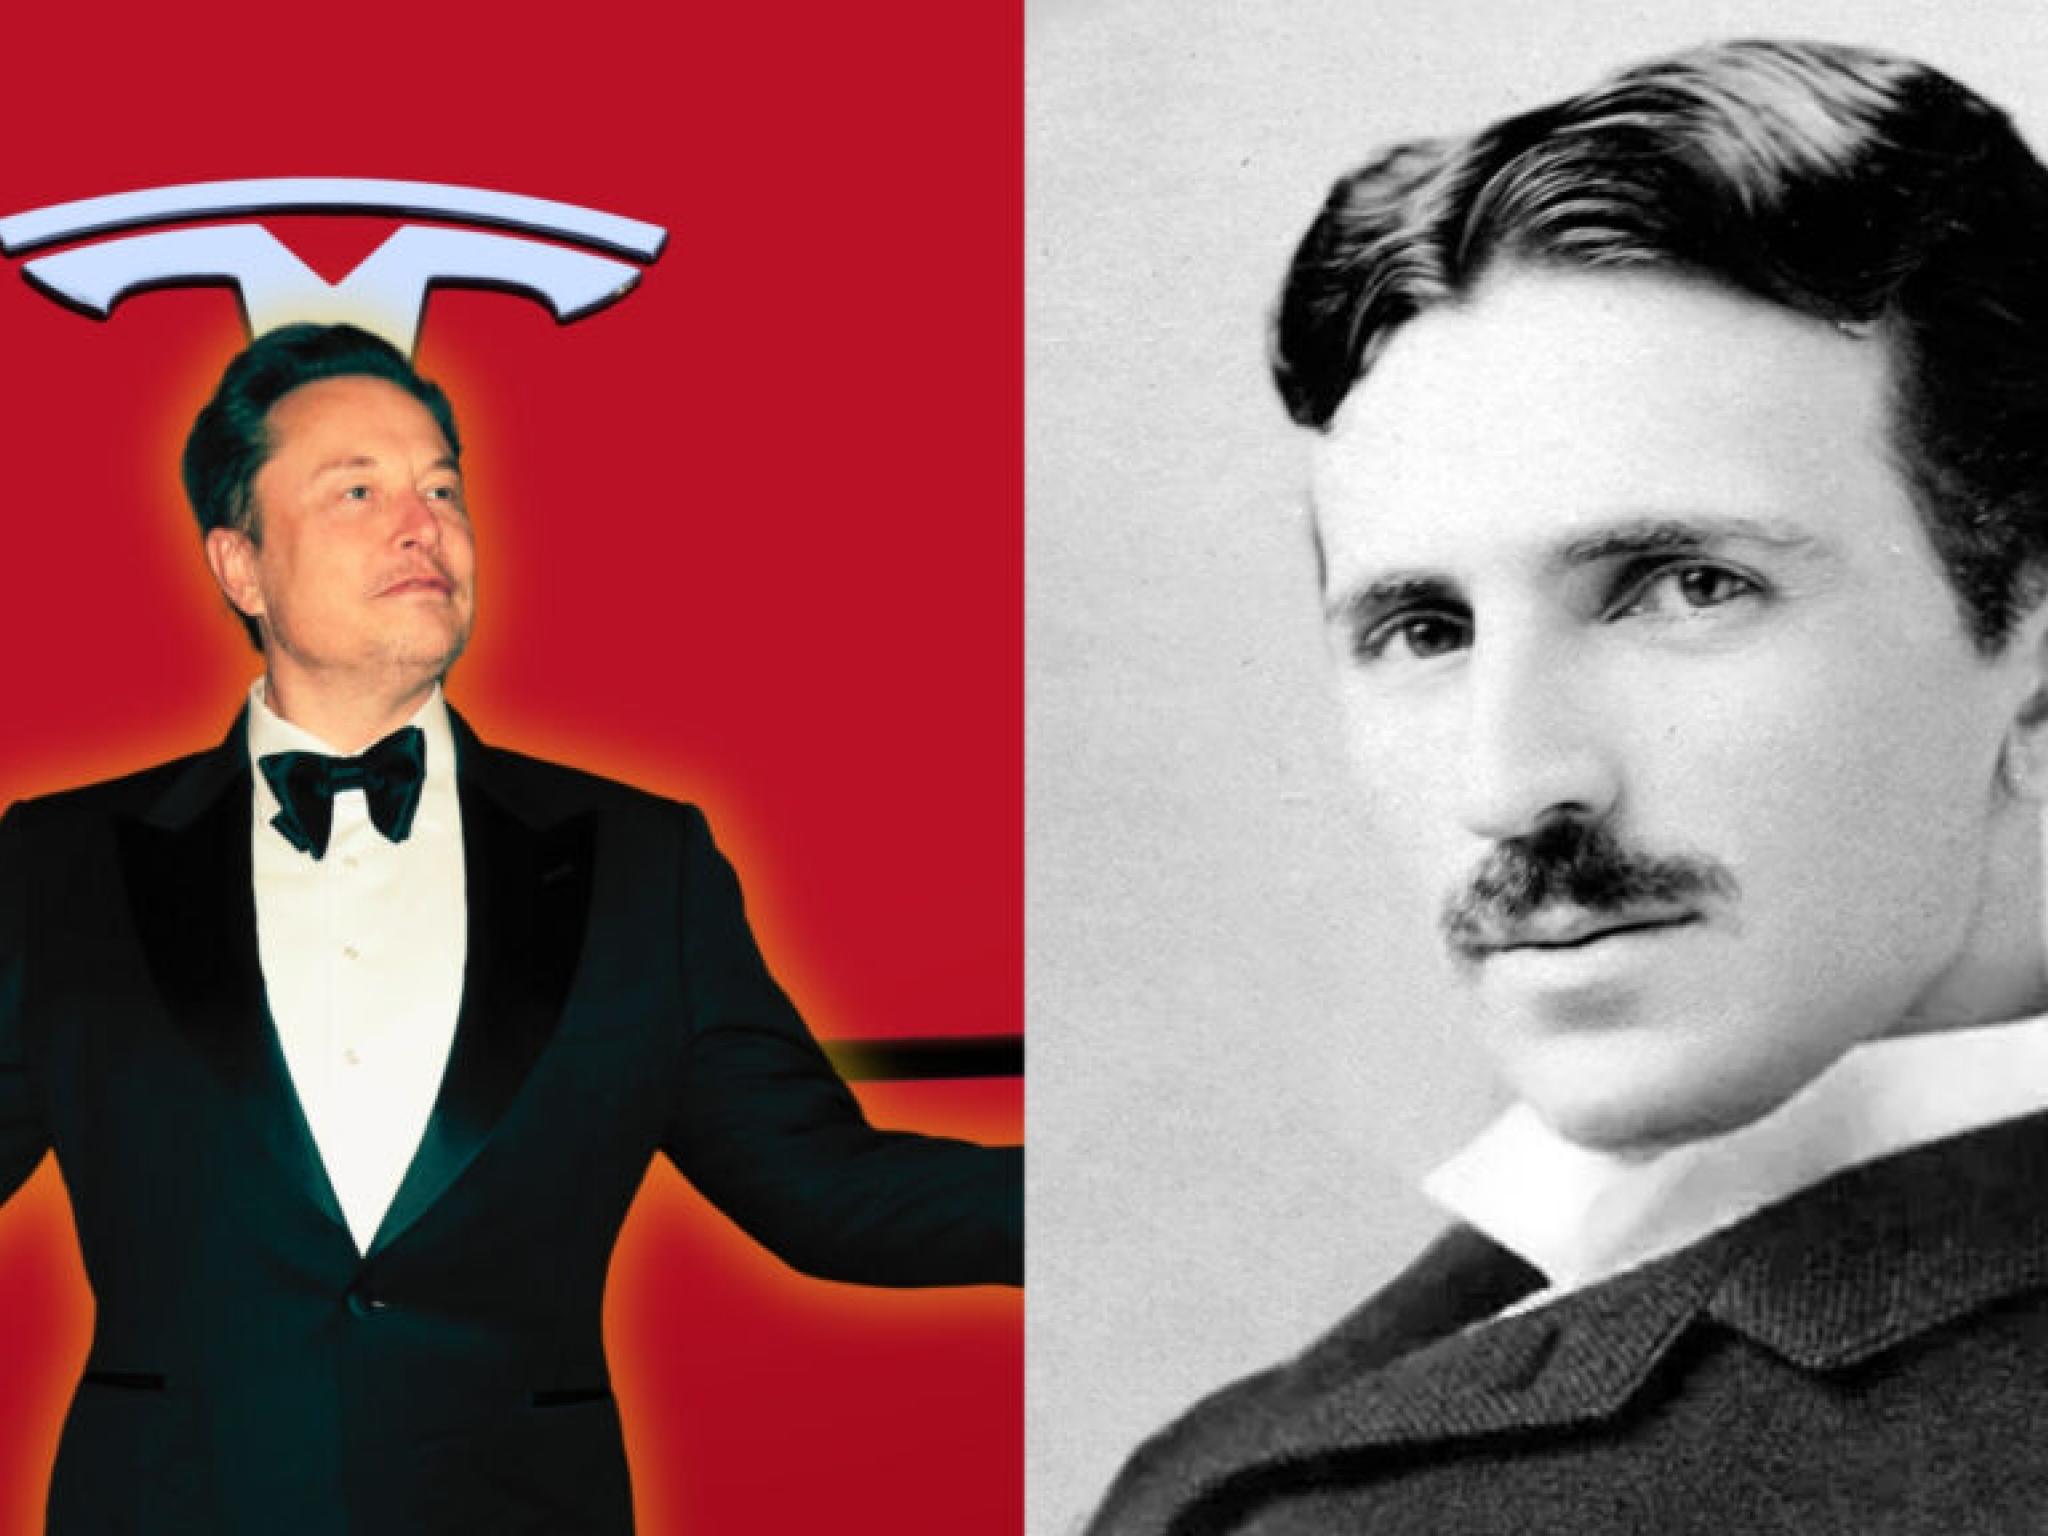  elon-musk-pays-tribute-to-great-inventor-nikola-tesla-on-his-birthday-says-ac-was-the-right-move-back-then-but-better-to-use-dc-now 